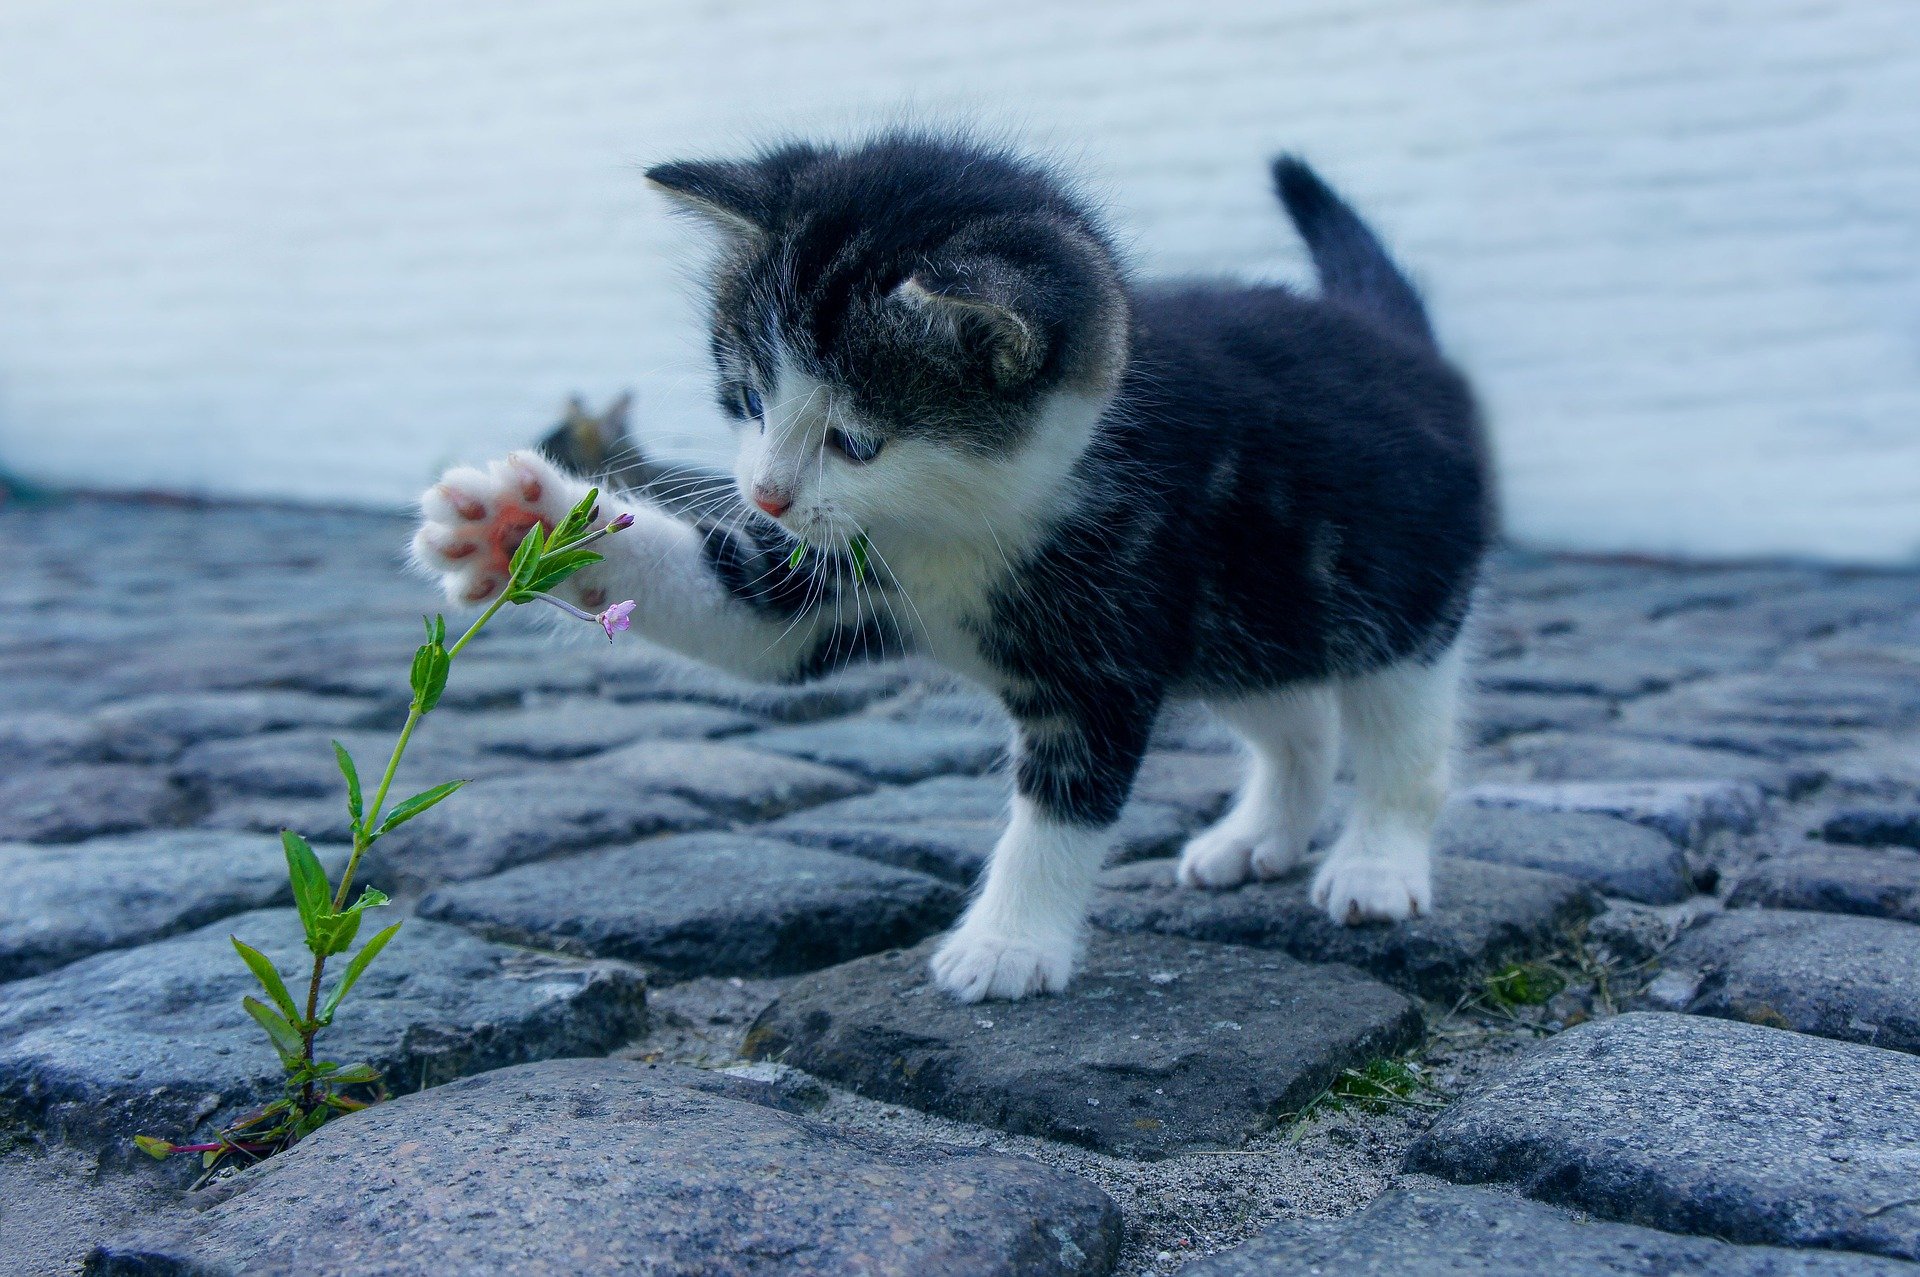 A kitten on a paver brick pawing at a plant growing through the seems of another paver brick